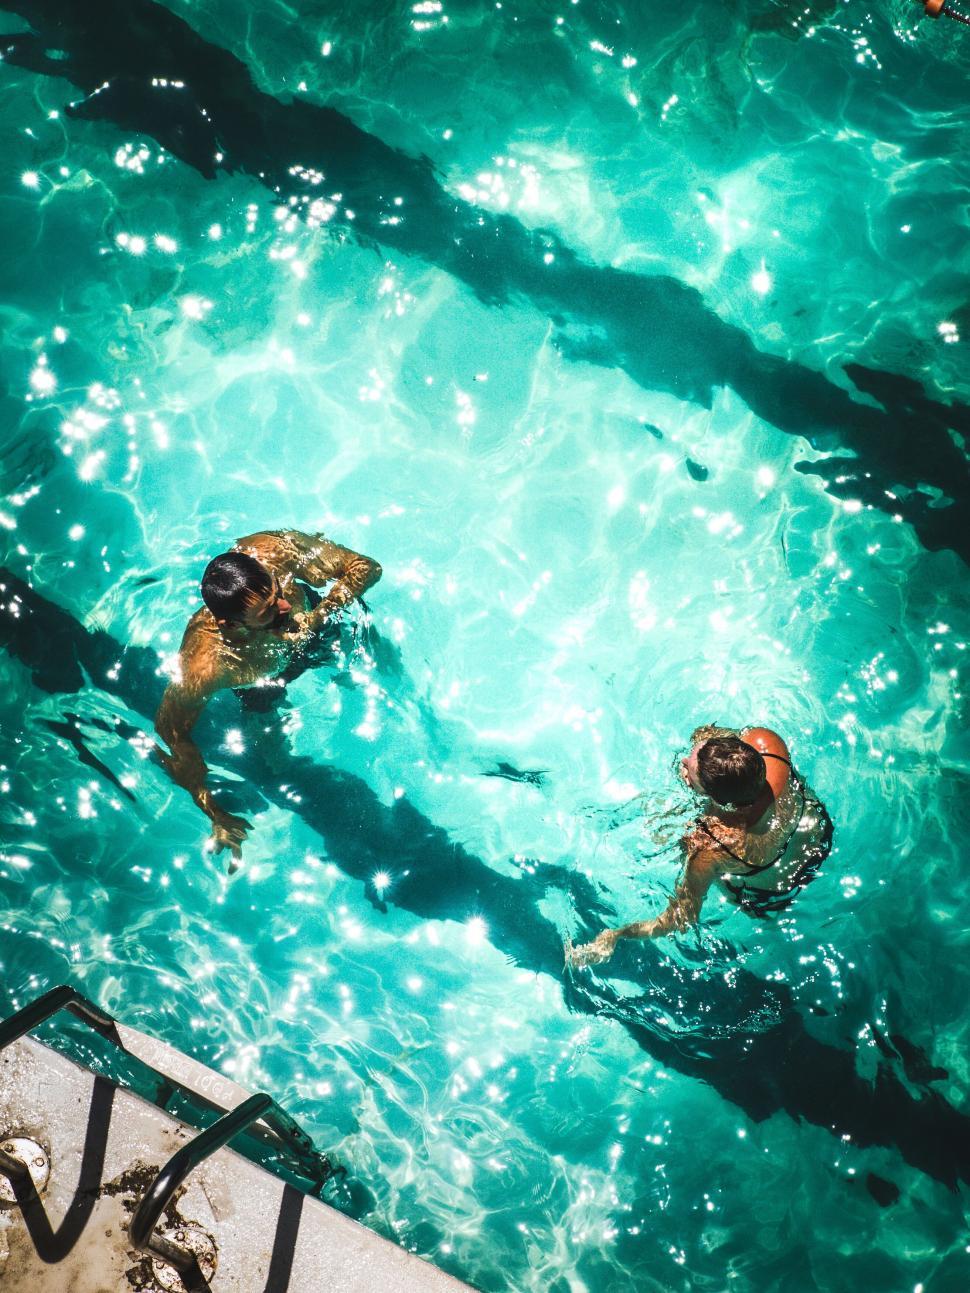 Free Image of Overhead View of Two People Swimming 